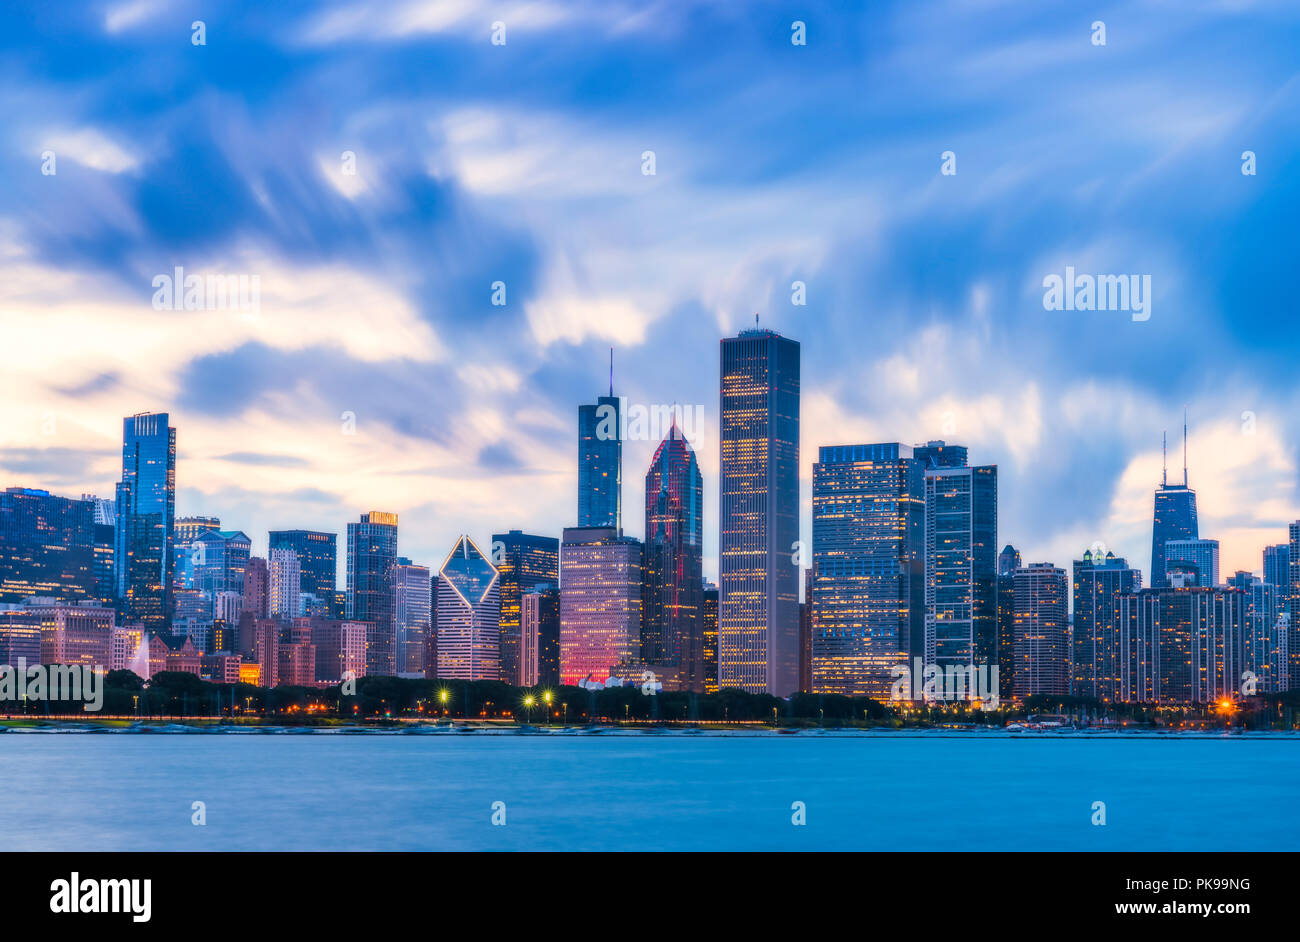 Chicago skyline at sunset with cloudy sky and reflection in water. Stock Photo